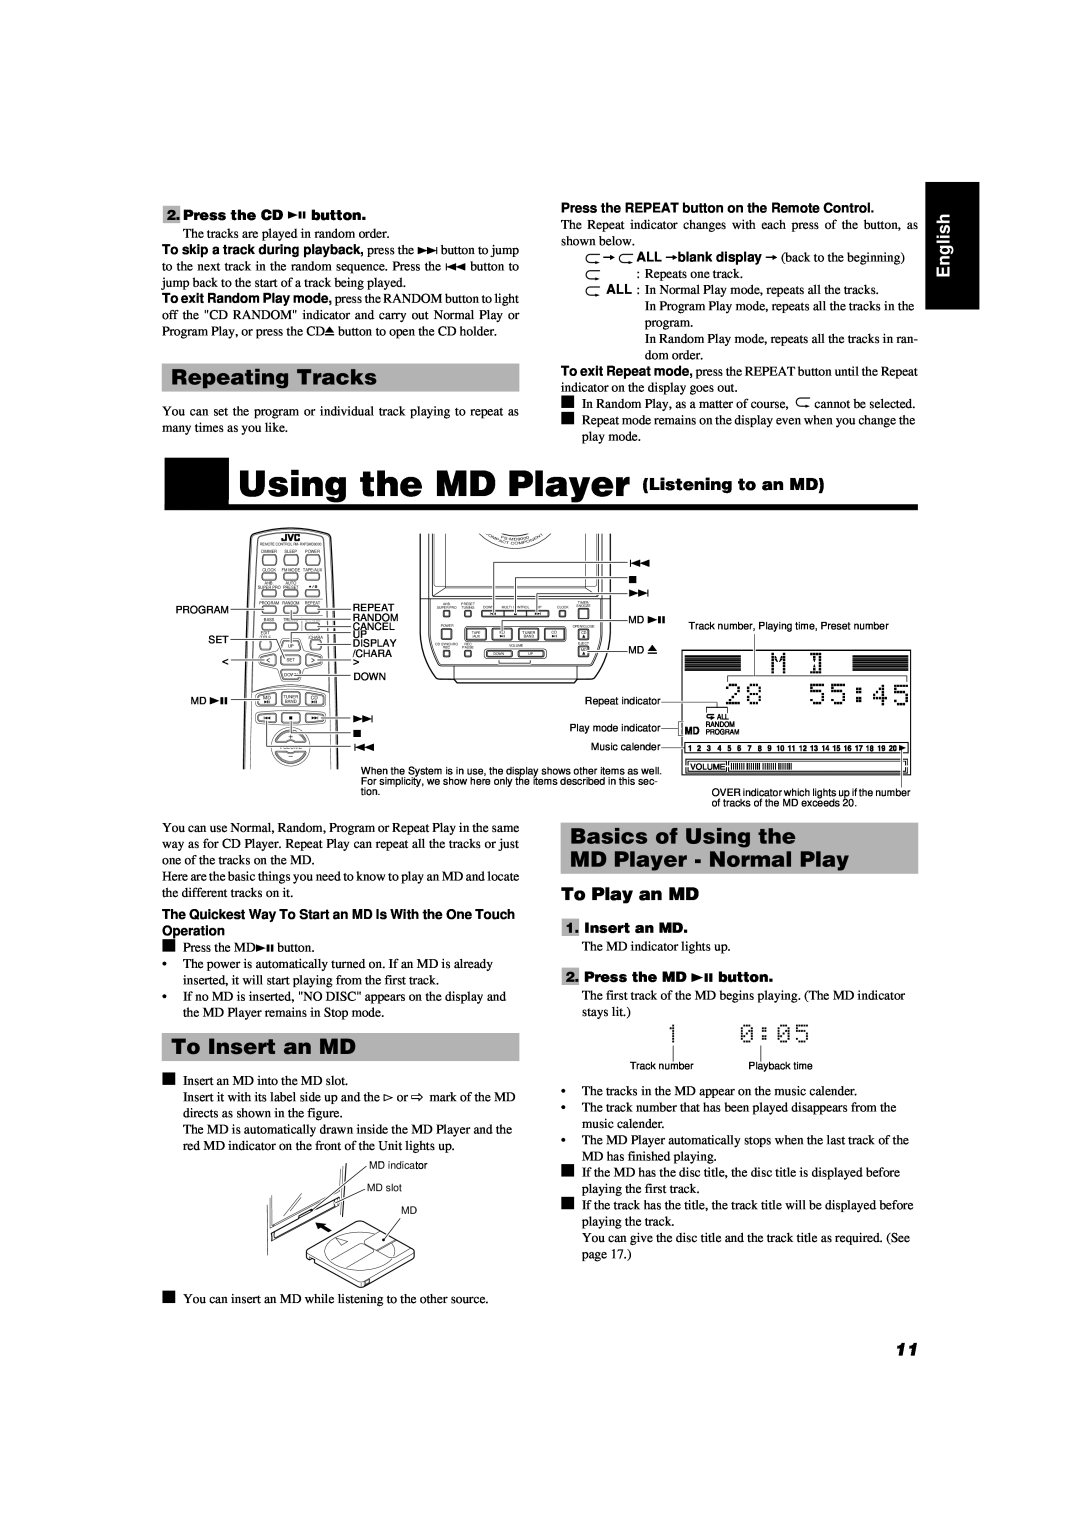 JVC FS-MD9000 manual Using the MD Player Listening to an MD, Repeating Tracks, Basics of Using the MD Player - Normal Play 